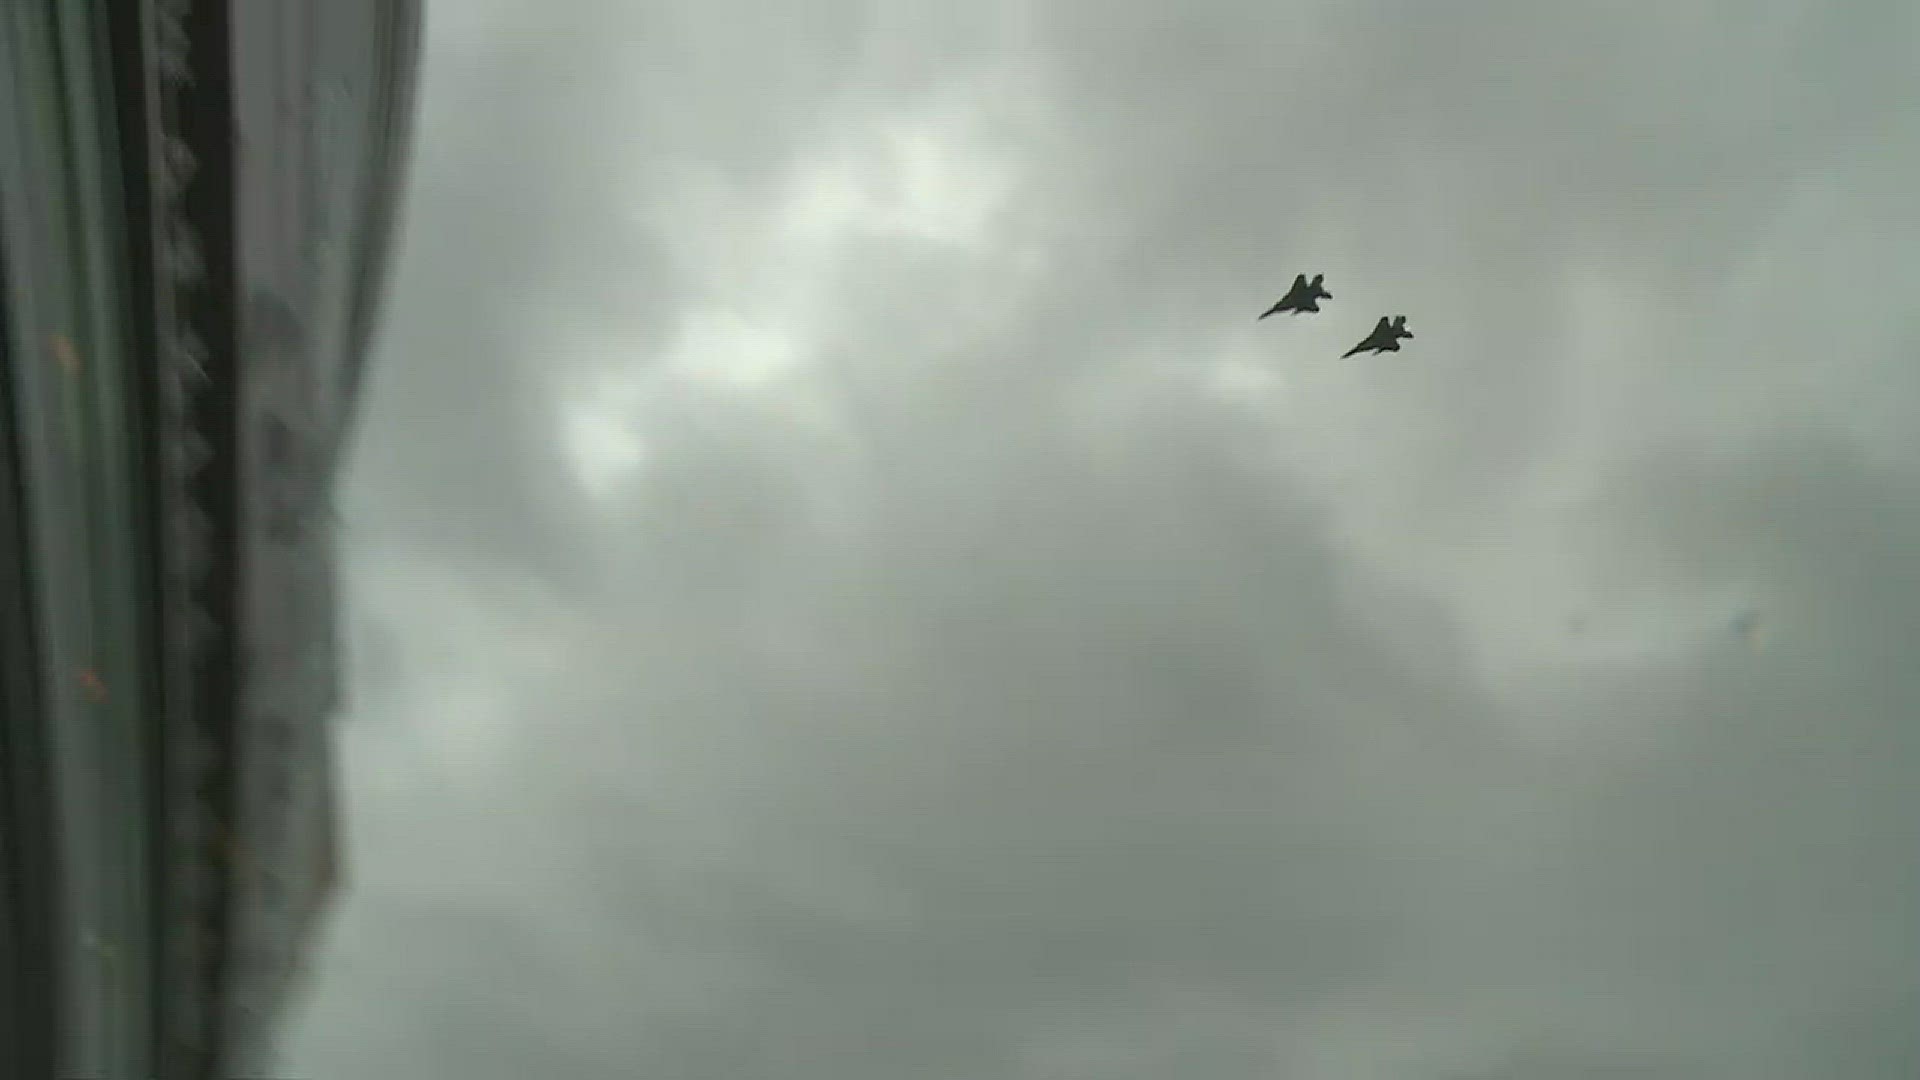 Three Air Force F/A-15 fighter jets flew over UT campus and Neyland Stadium to start the Vol Walk on Saturday afternoon before the game against LSU. It was Brady Hoke's first Vol Walk as interim head coach.